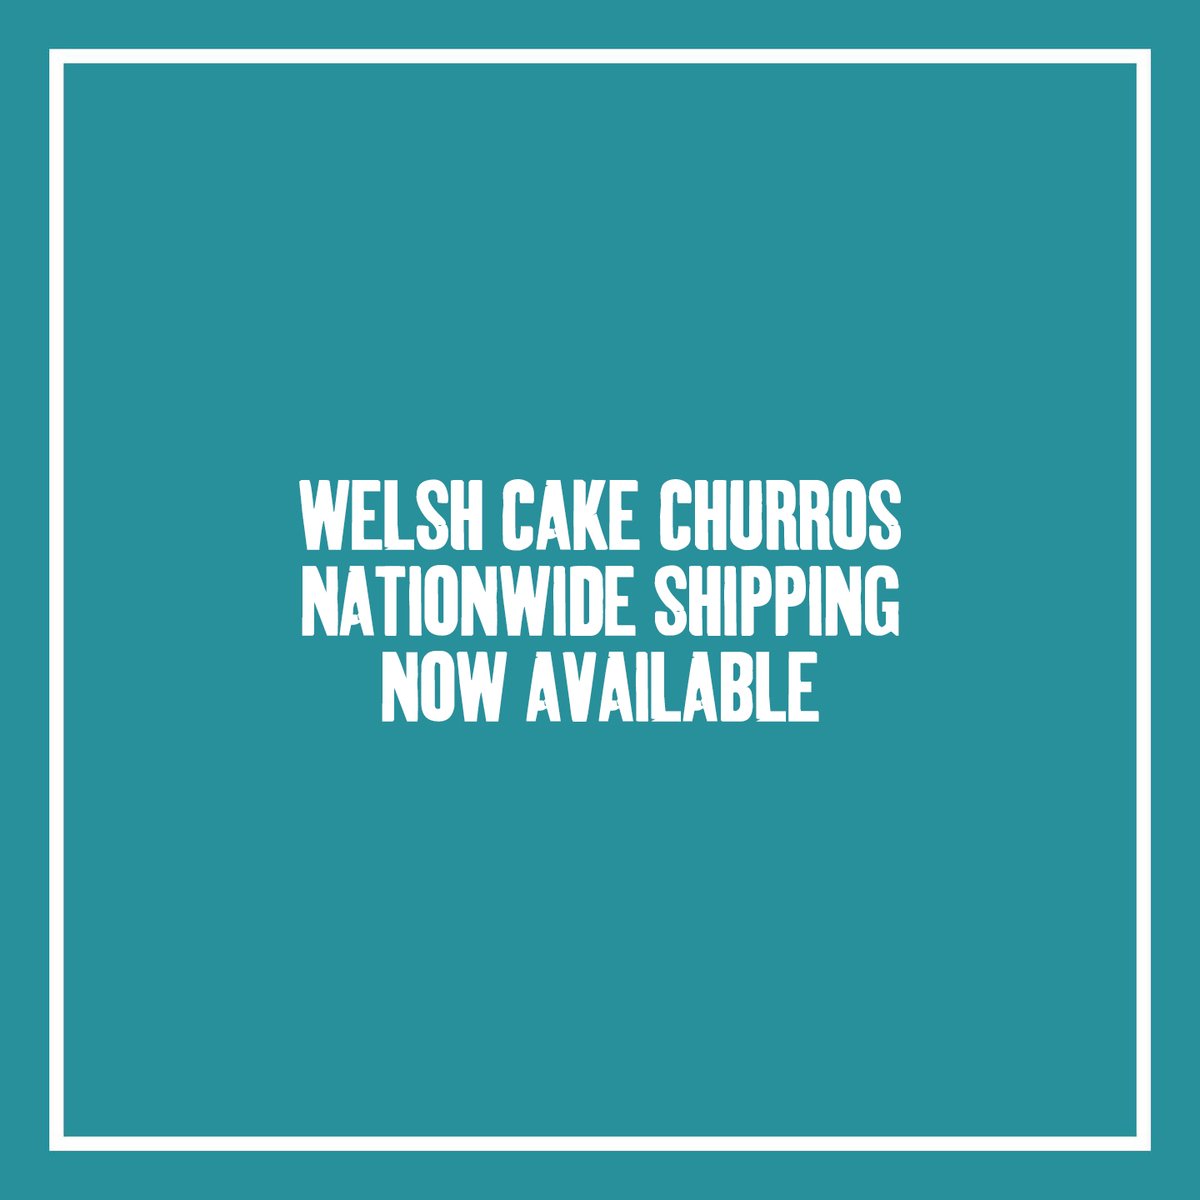 🚨 WELSH CAKE CHURROS ARE NOW LIVE 🚨

A very limited amount of Welsh Cakes Churros are now available online for nationwide shipping. Order yours here 👇🏼

mamguwelshcakes.com/products/welsh…

#MamGuWelshcakes #WelshCakes #WelshCakeChurros #MadeInTheLandOfDragons #WelshCakesWithATwist